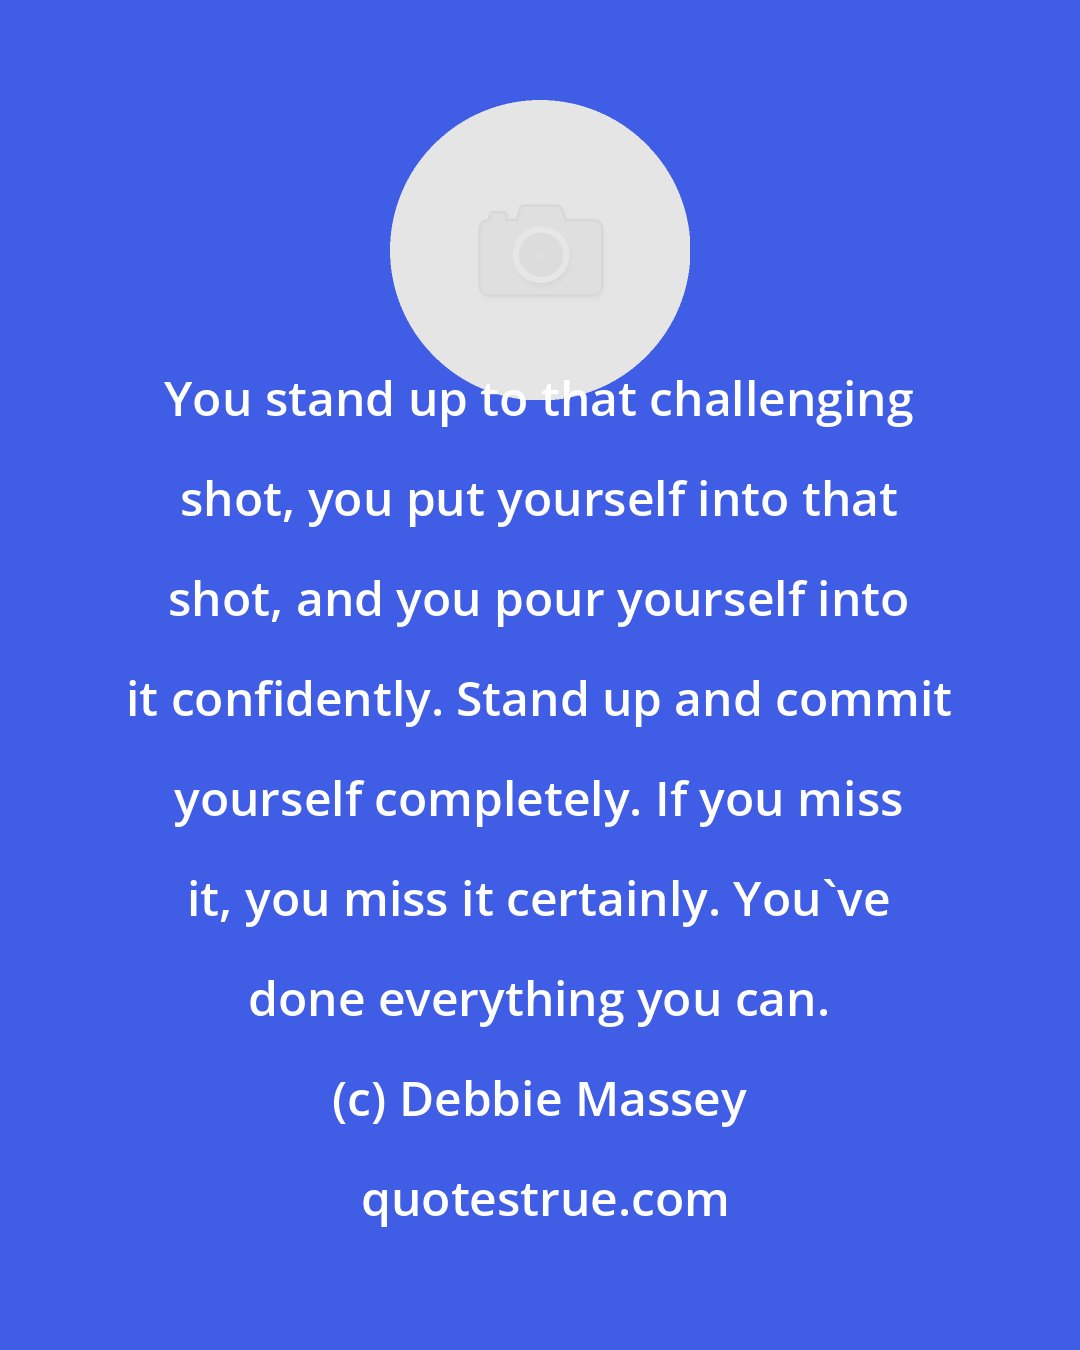 Debbie Massey: You stand up to that challenging shot, you put yourself into that shot, and you pour yourself into it confidently. Stand up and commit yourself completely. If you miss it, you miss it certainly. You've done everything you can.